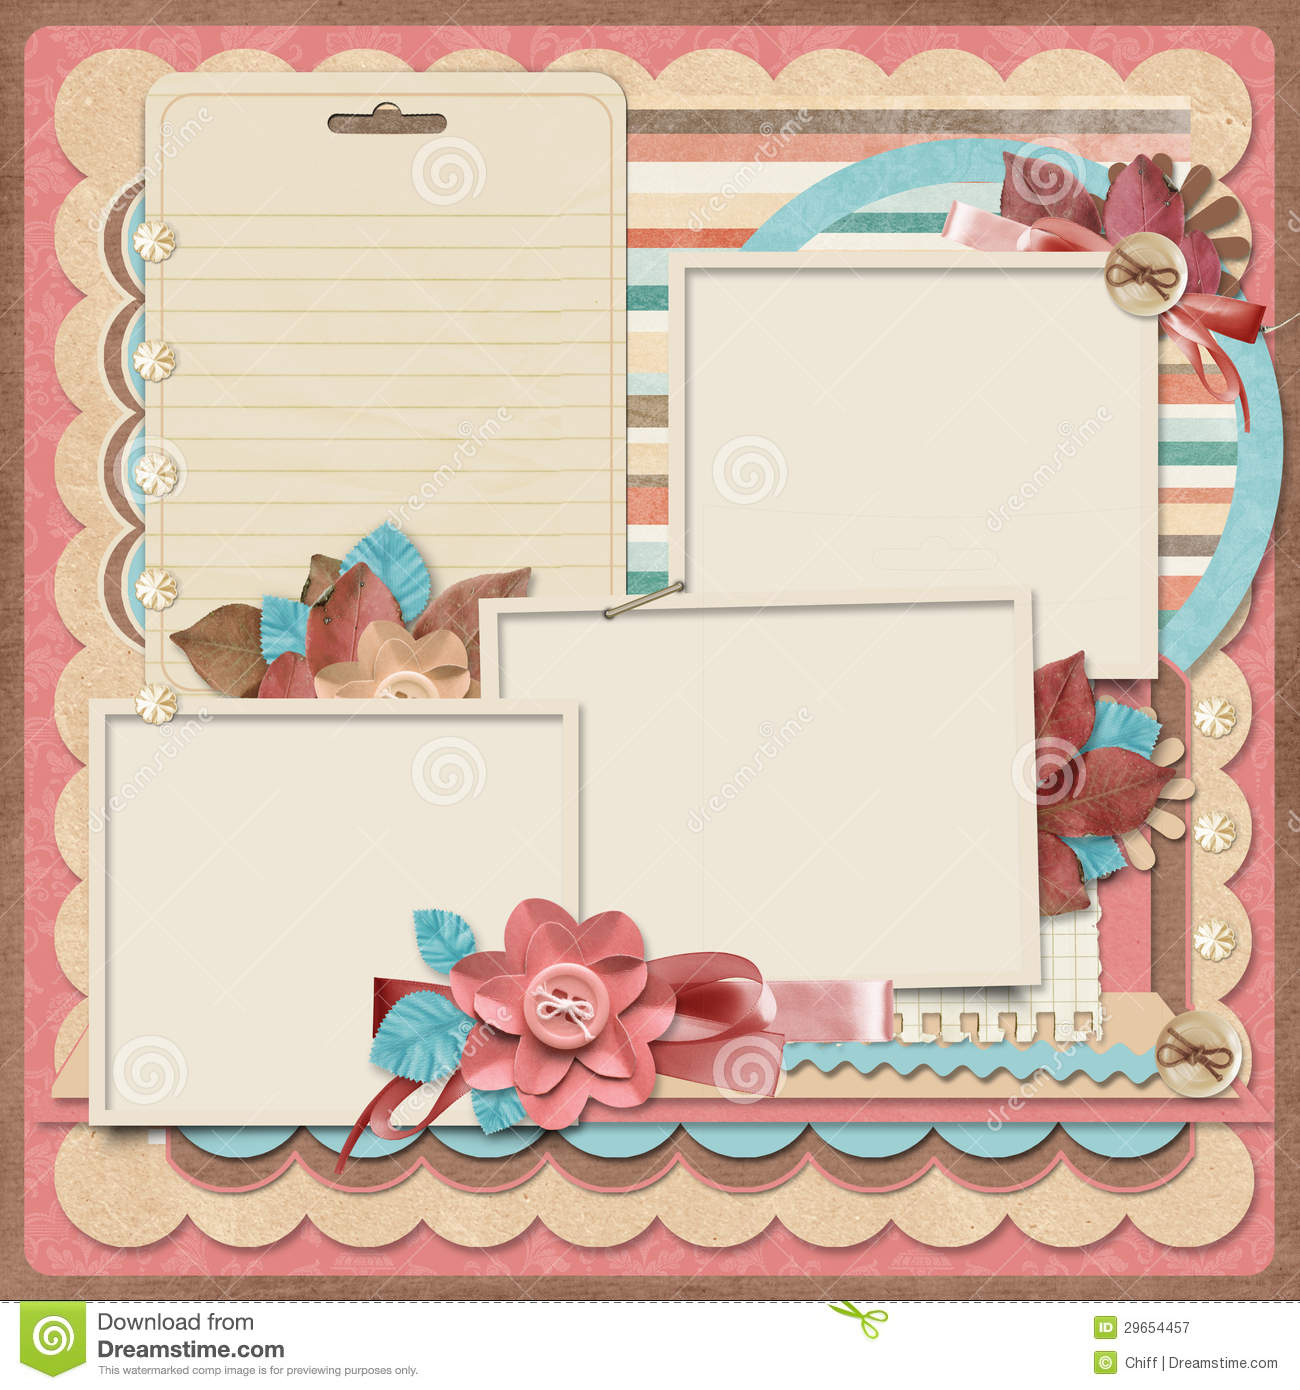 12 Free Design Templates For Scrapbooking Images - Free Scrapbook - Free Printable Scrapbook Pages